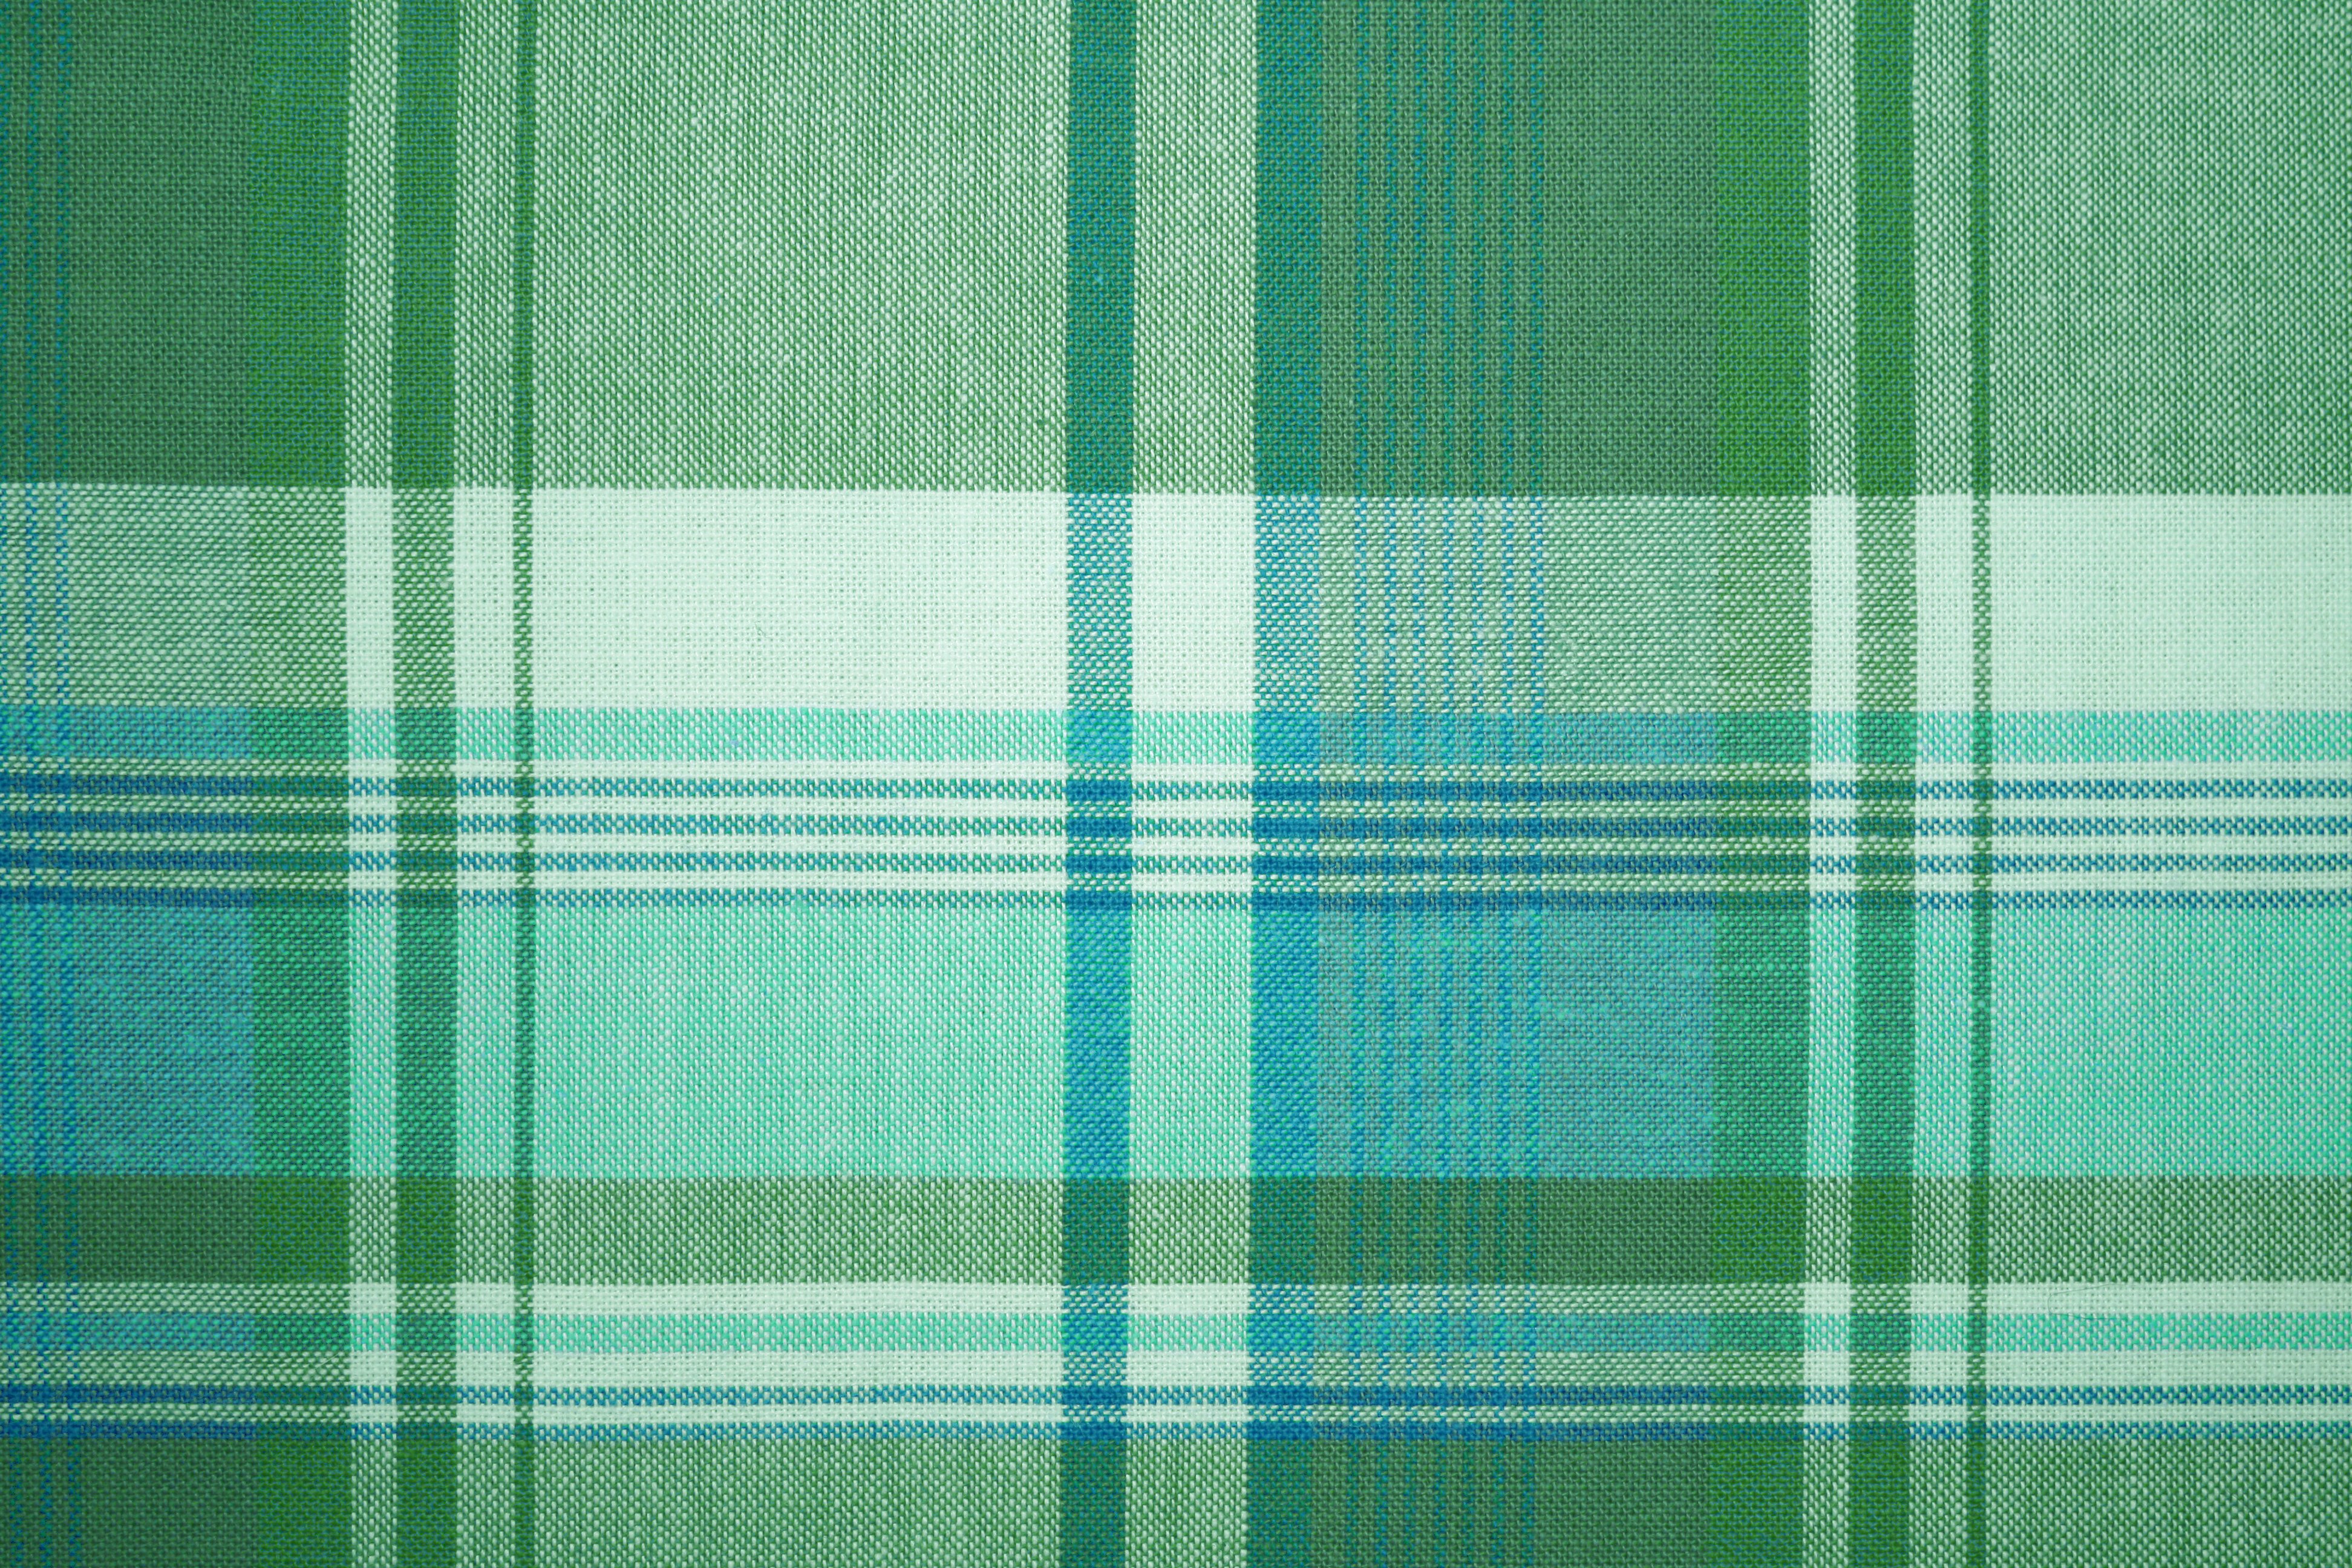 Green and Turquoise Plaid Fabric Texture   Free High Resolution Photo